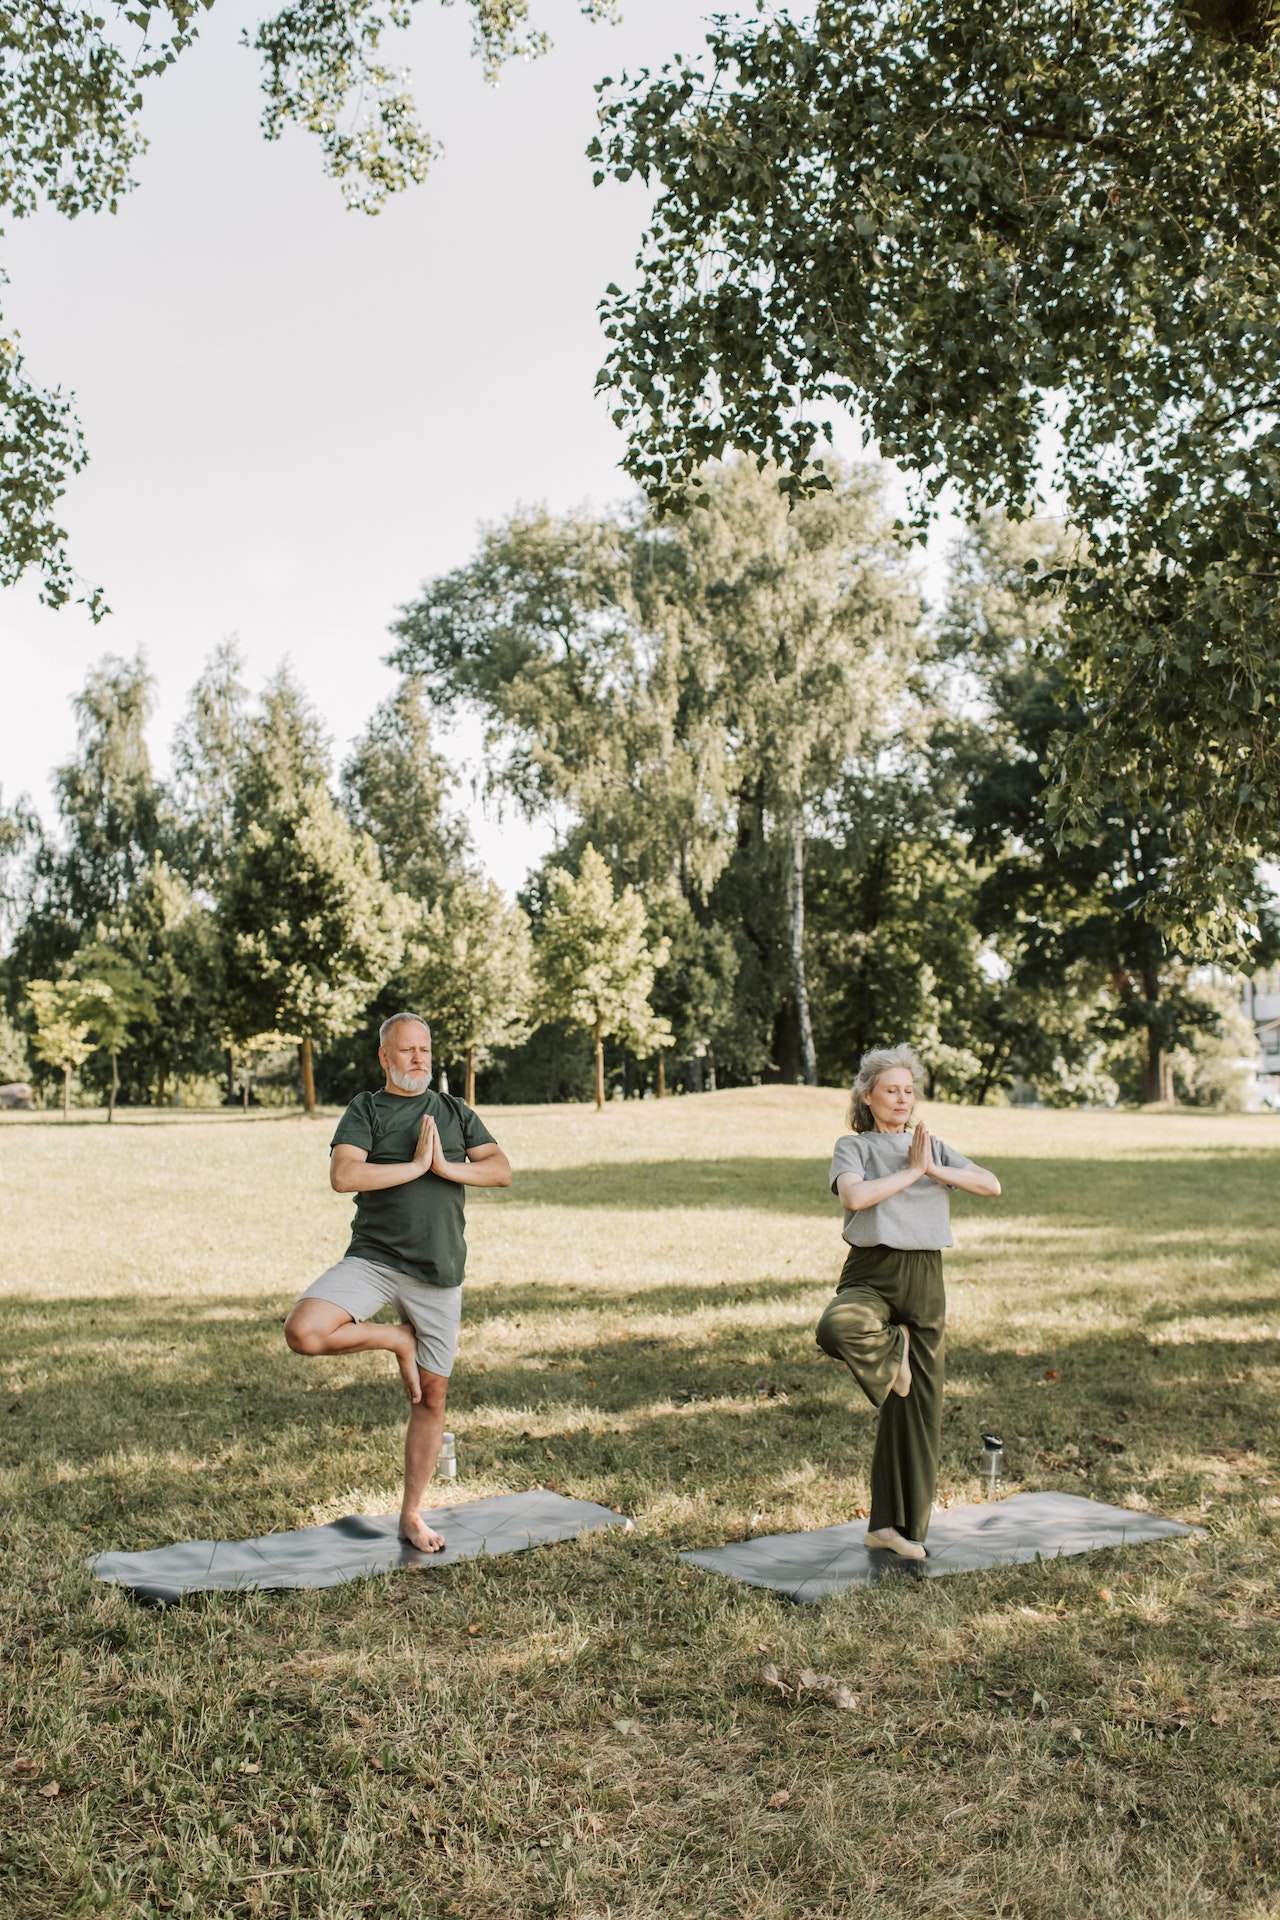 Woman in Gray Shirt Standing on Gray Yoga Mat while Doing Yoga on Green Grass Field
